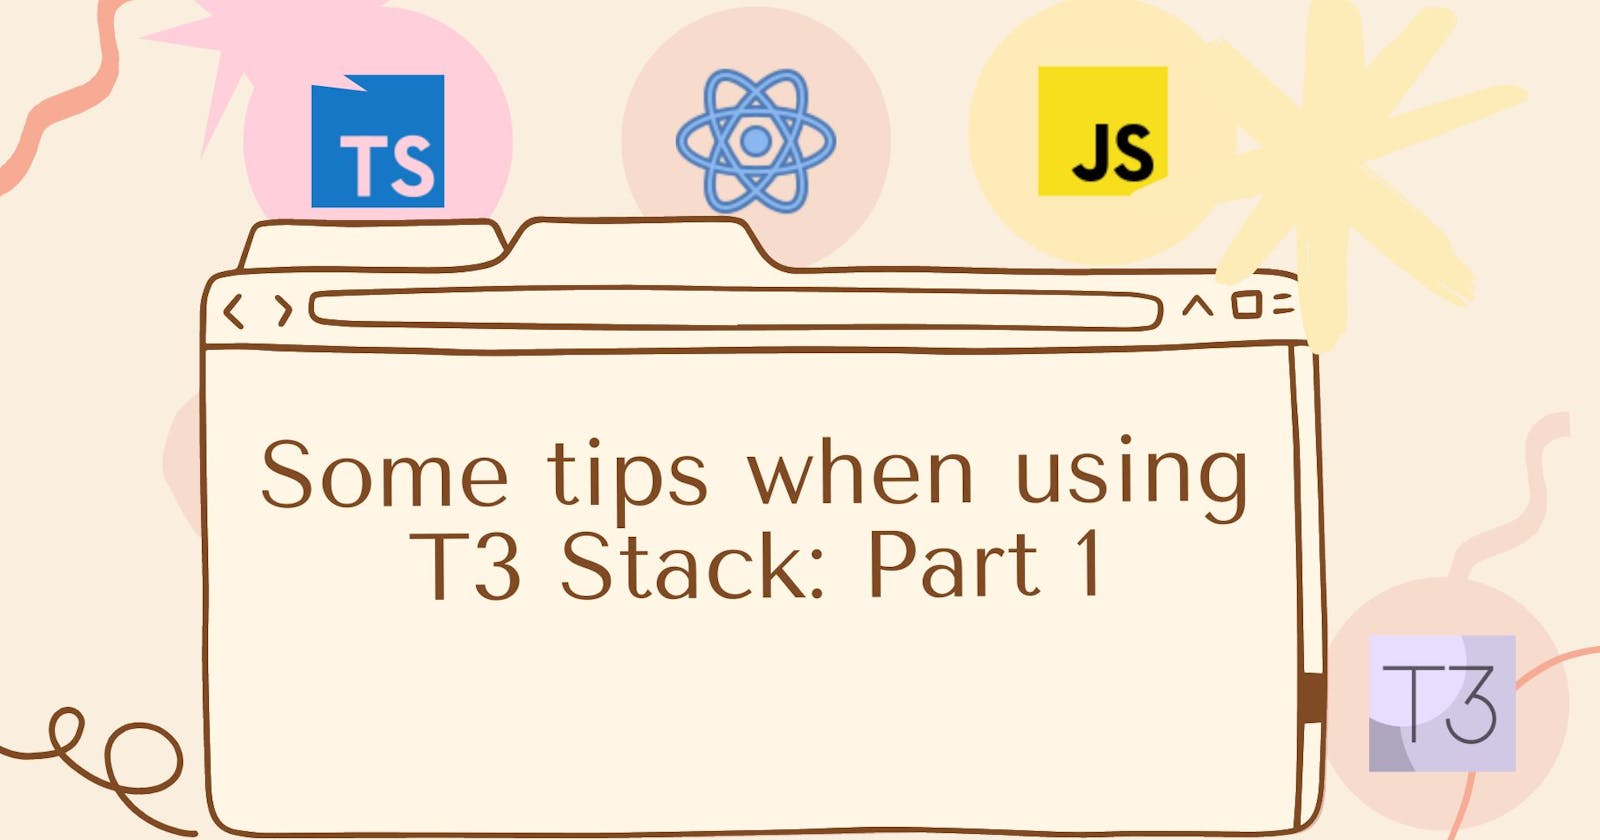 Some tips when using T3 Stack: NextAuth and Models types